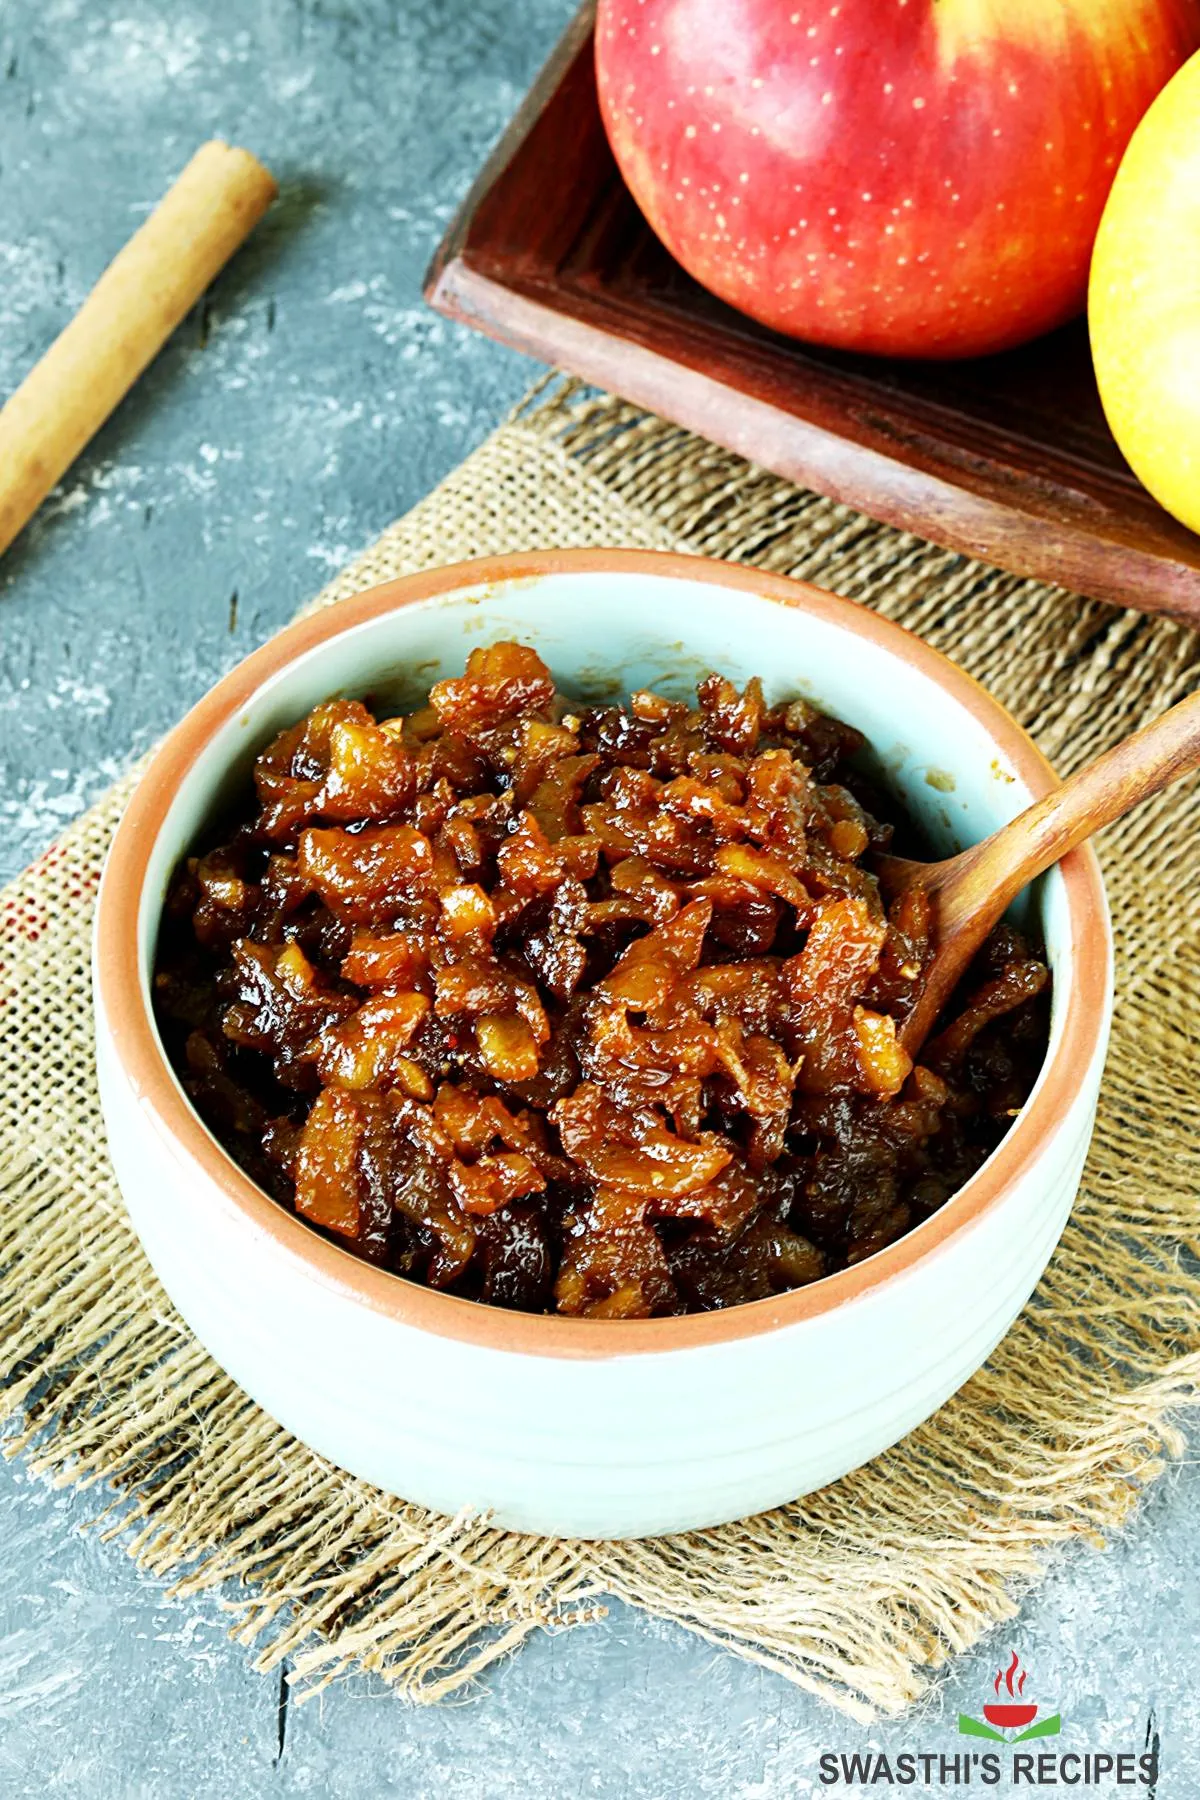 apple chutney made with apples, spices and vinegar